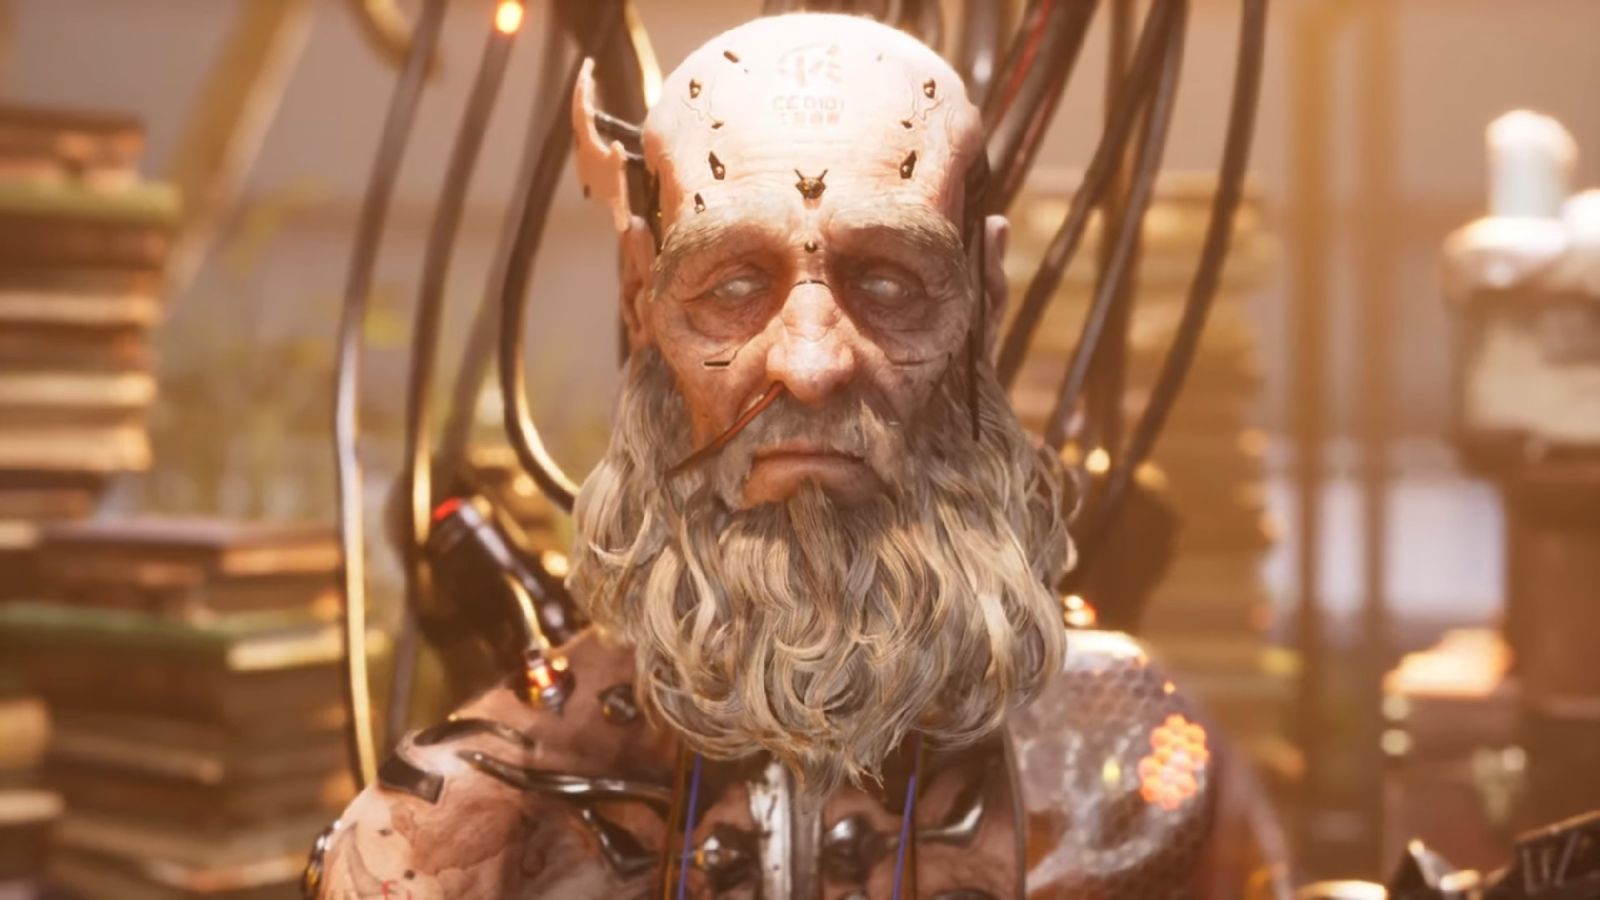 A portrait shot of a creepy old man from Stellar Blade 